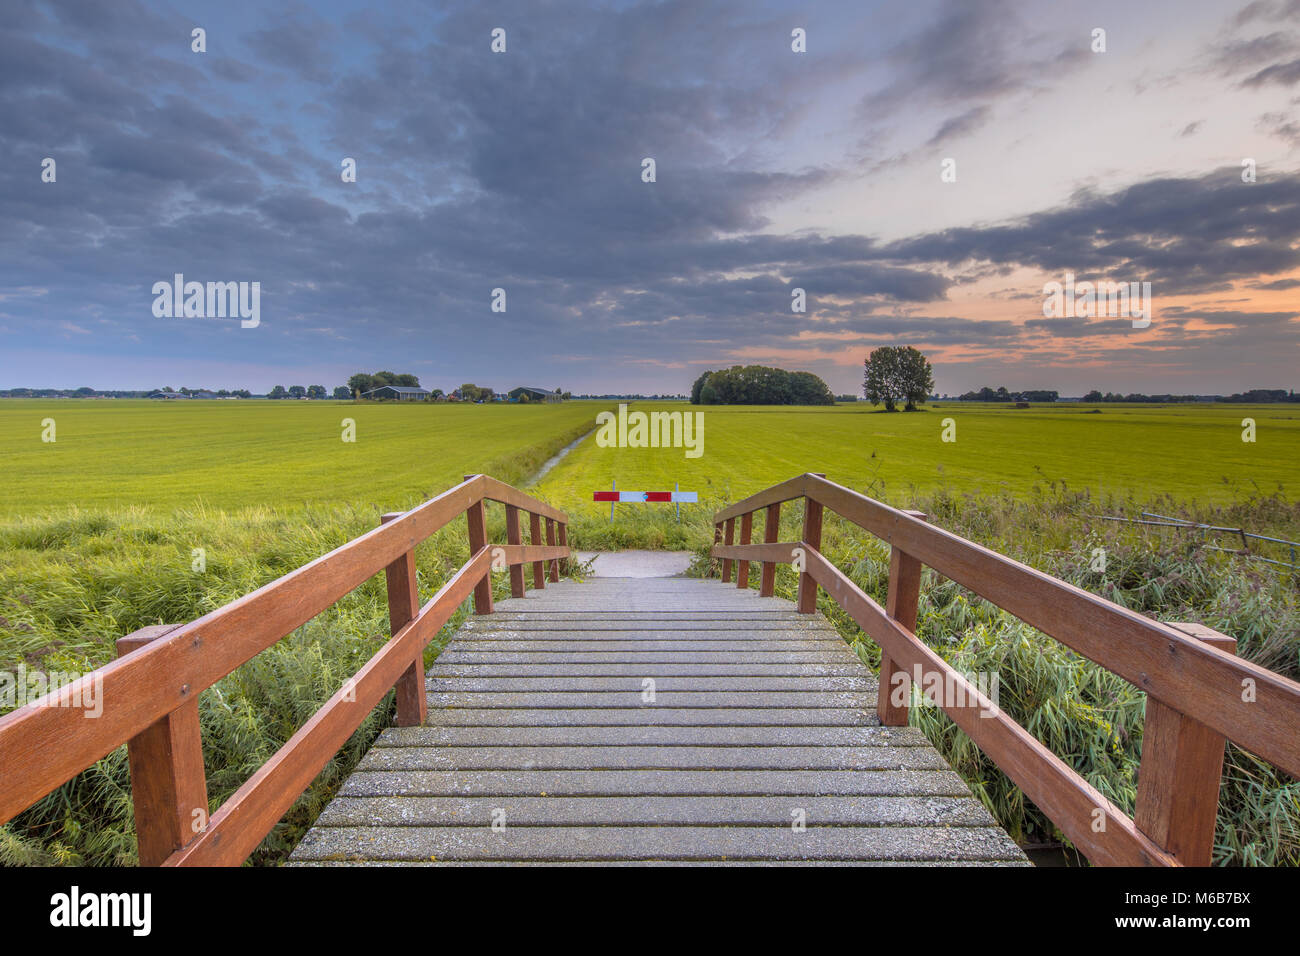 Wooden bridge in agricultural landscape against beautiful colored sunset Stock Photo